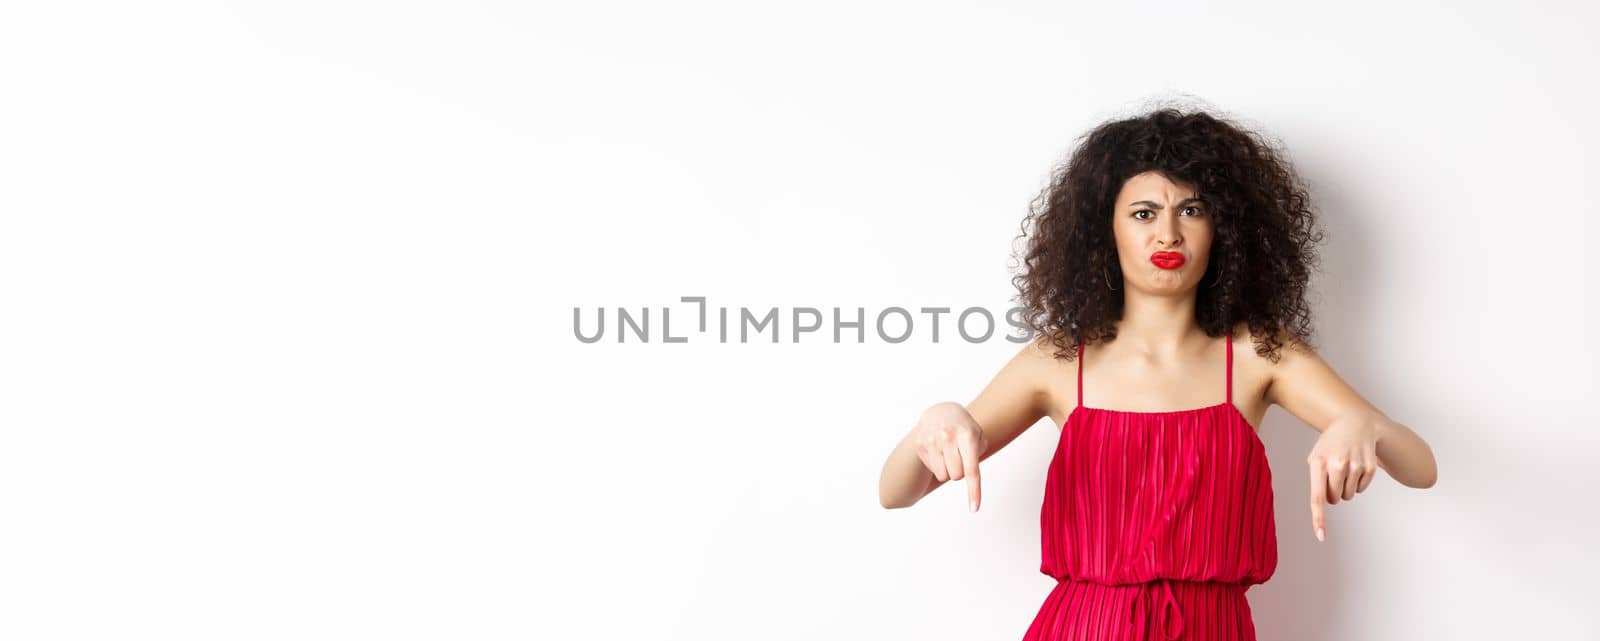 Disappointed caucasian woman in red dress complaining on spoiled date, frowning and grimacing, standing over white background.